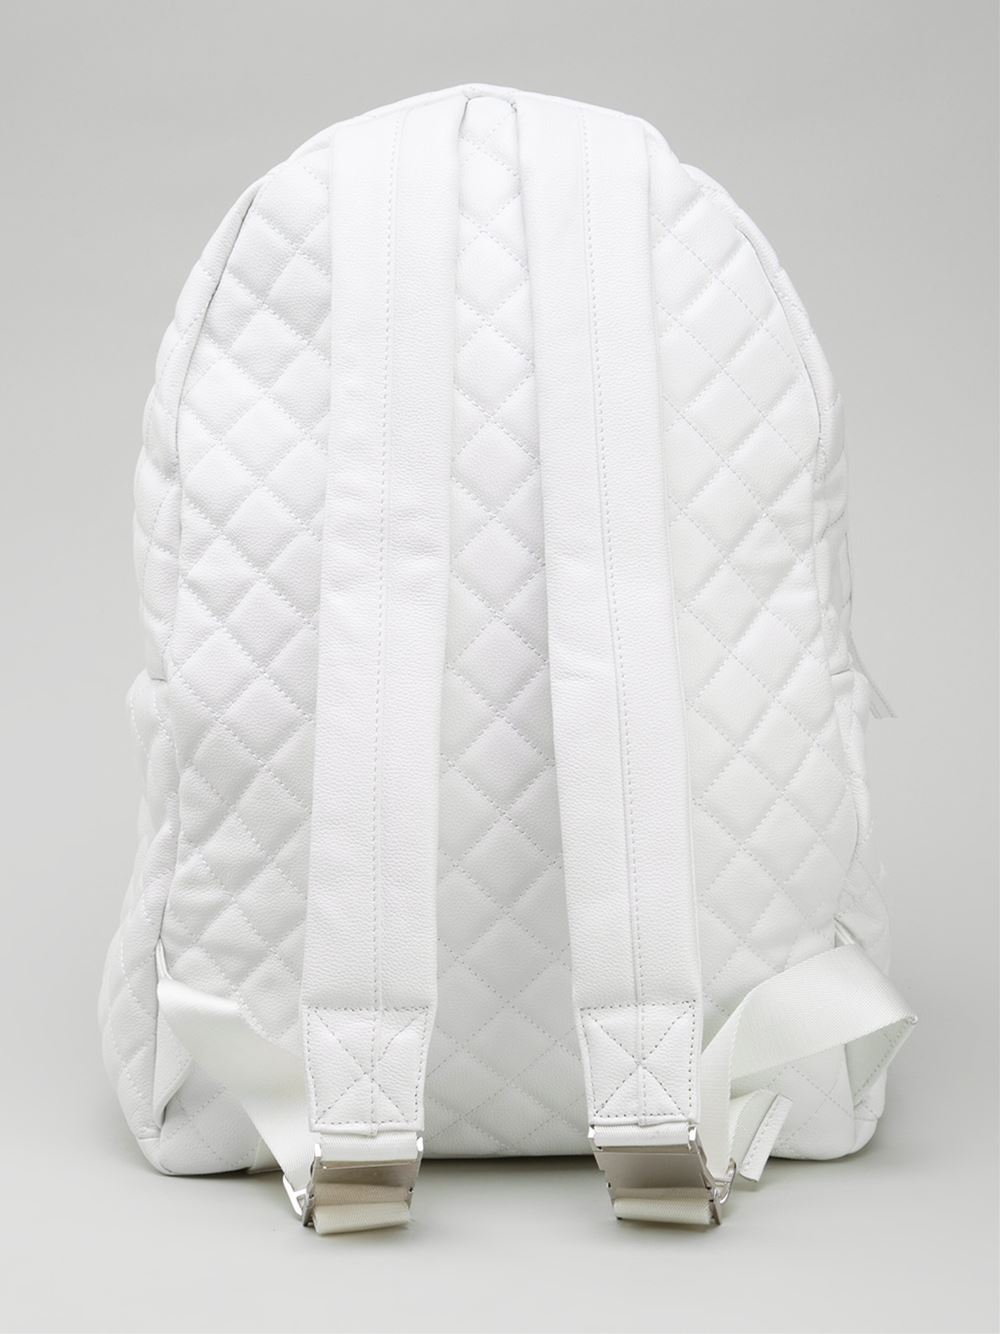 Lyst - Stampd Quilted Backpack in White for Men